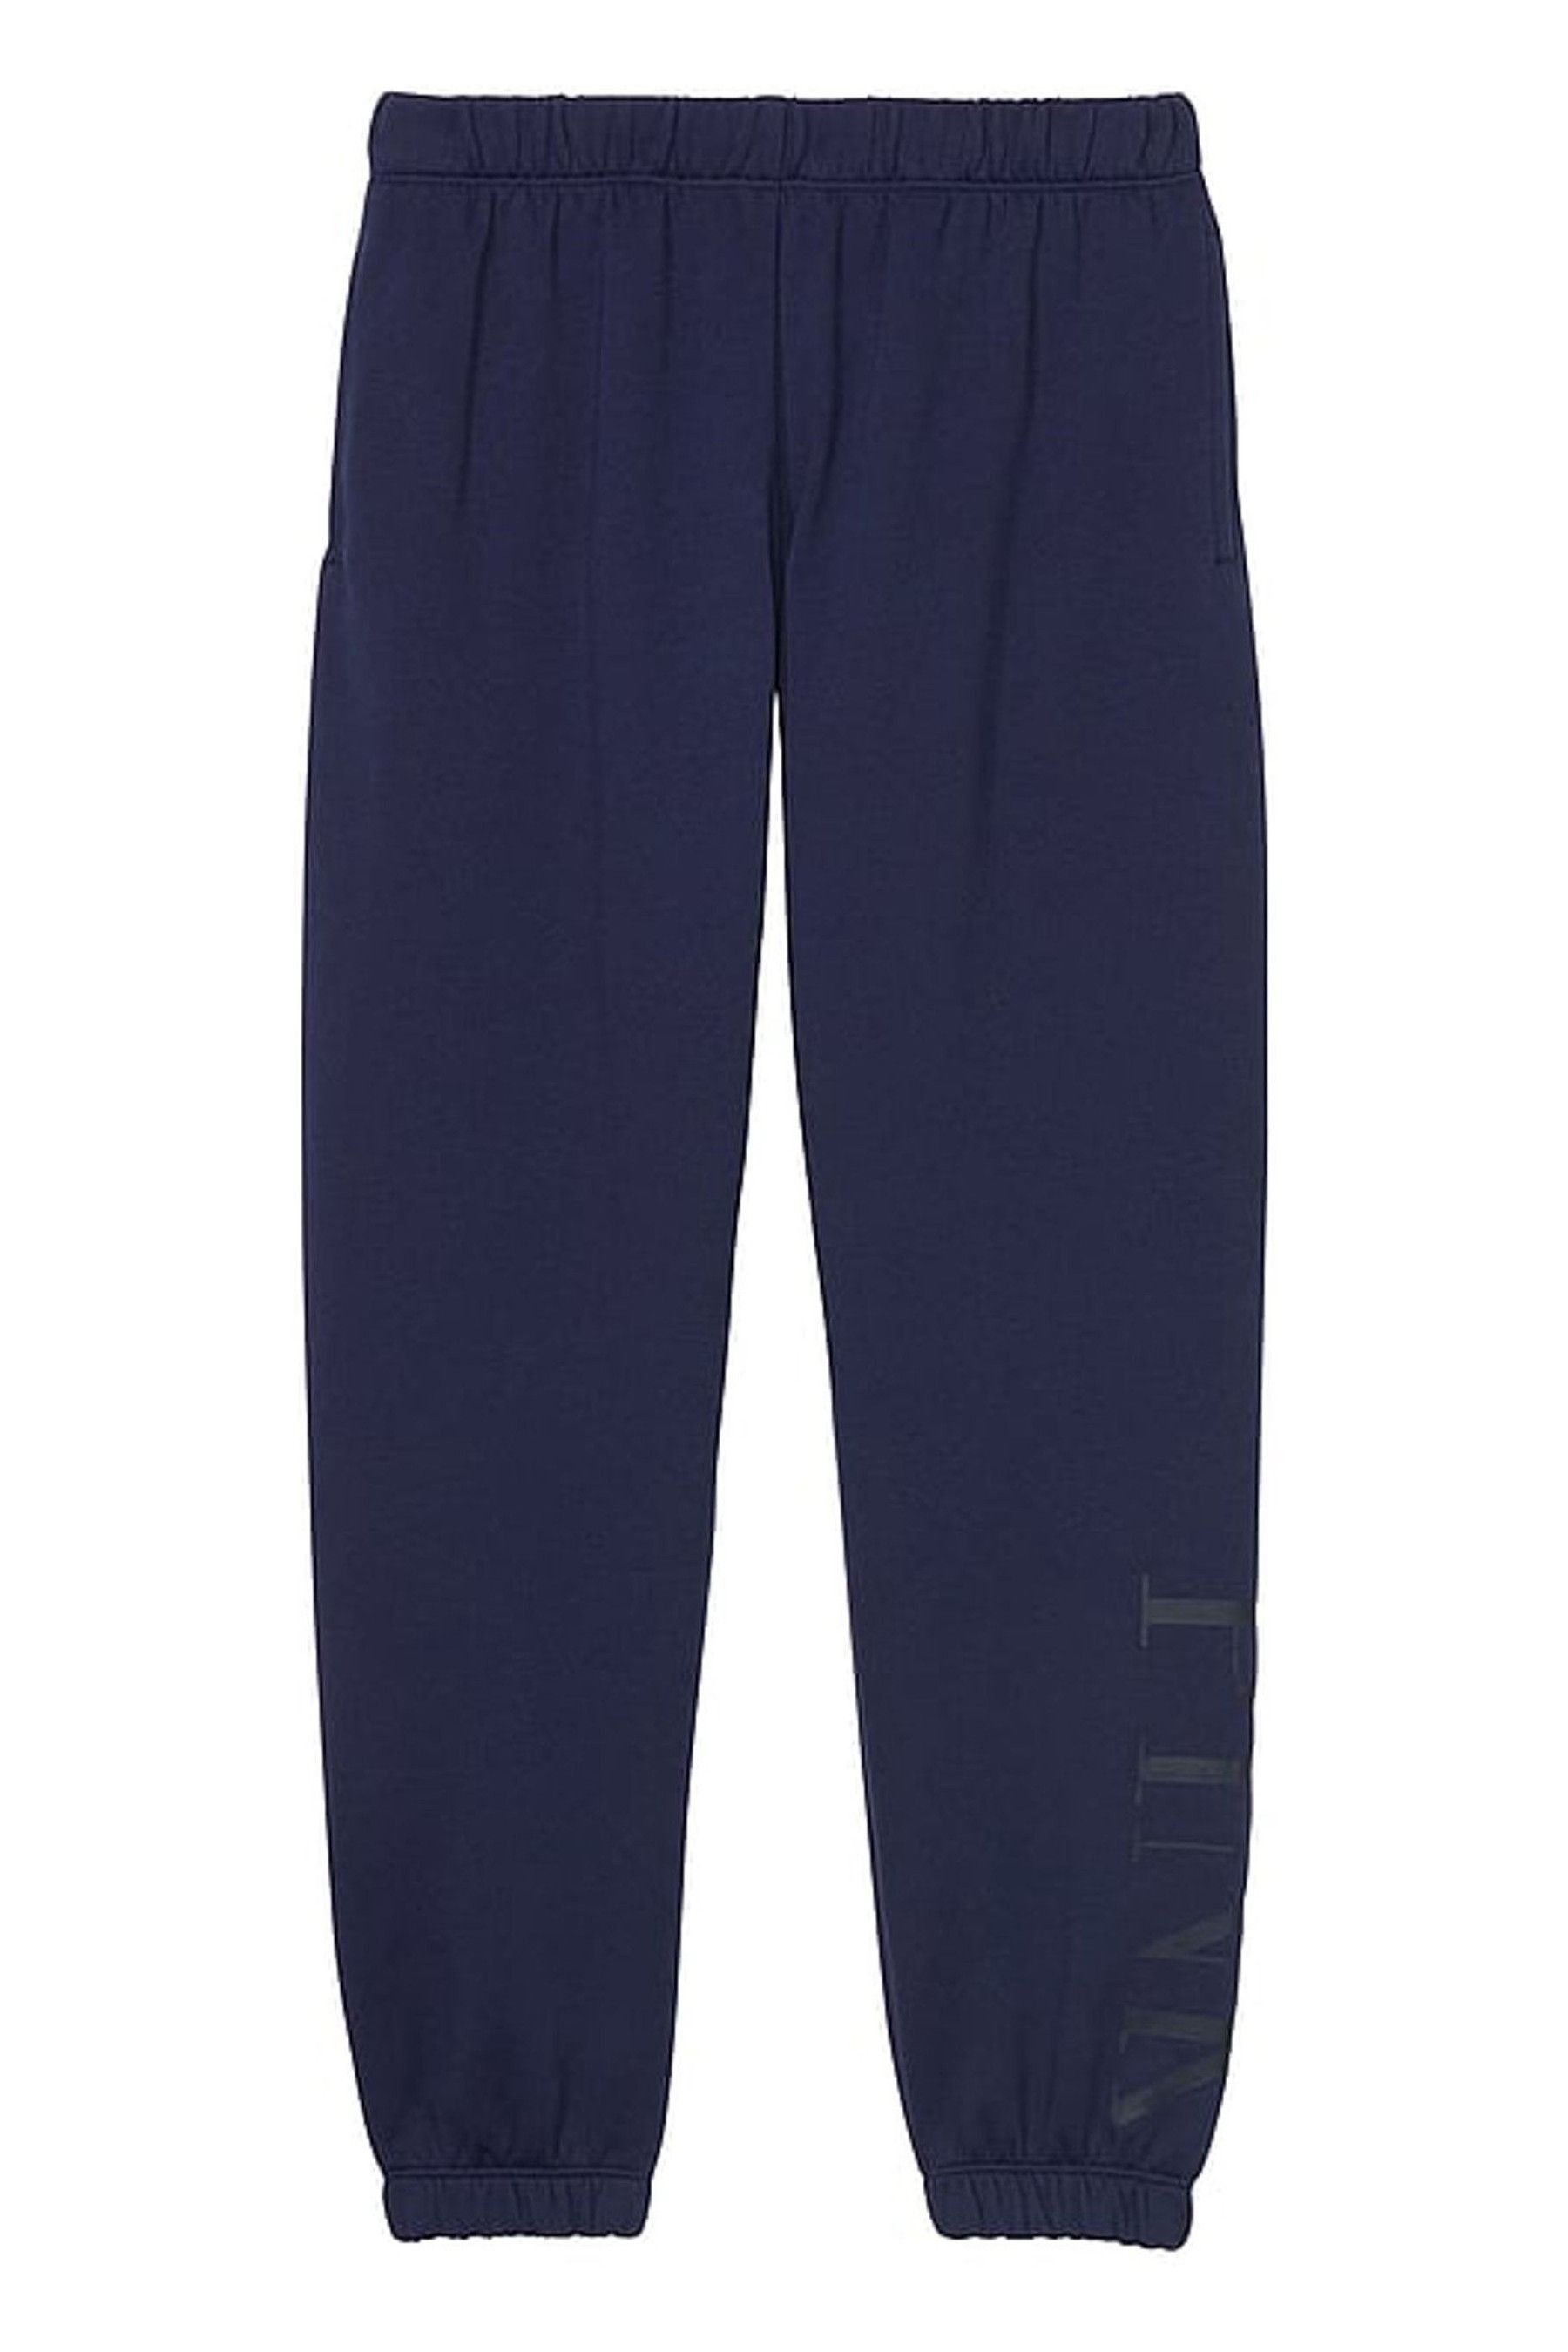 Buy Victoria's Secret PINK Everyday Fleece Classic Joggers from the ...